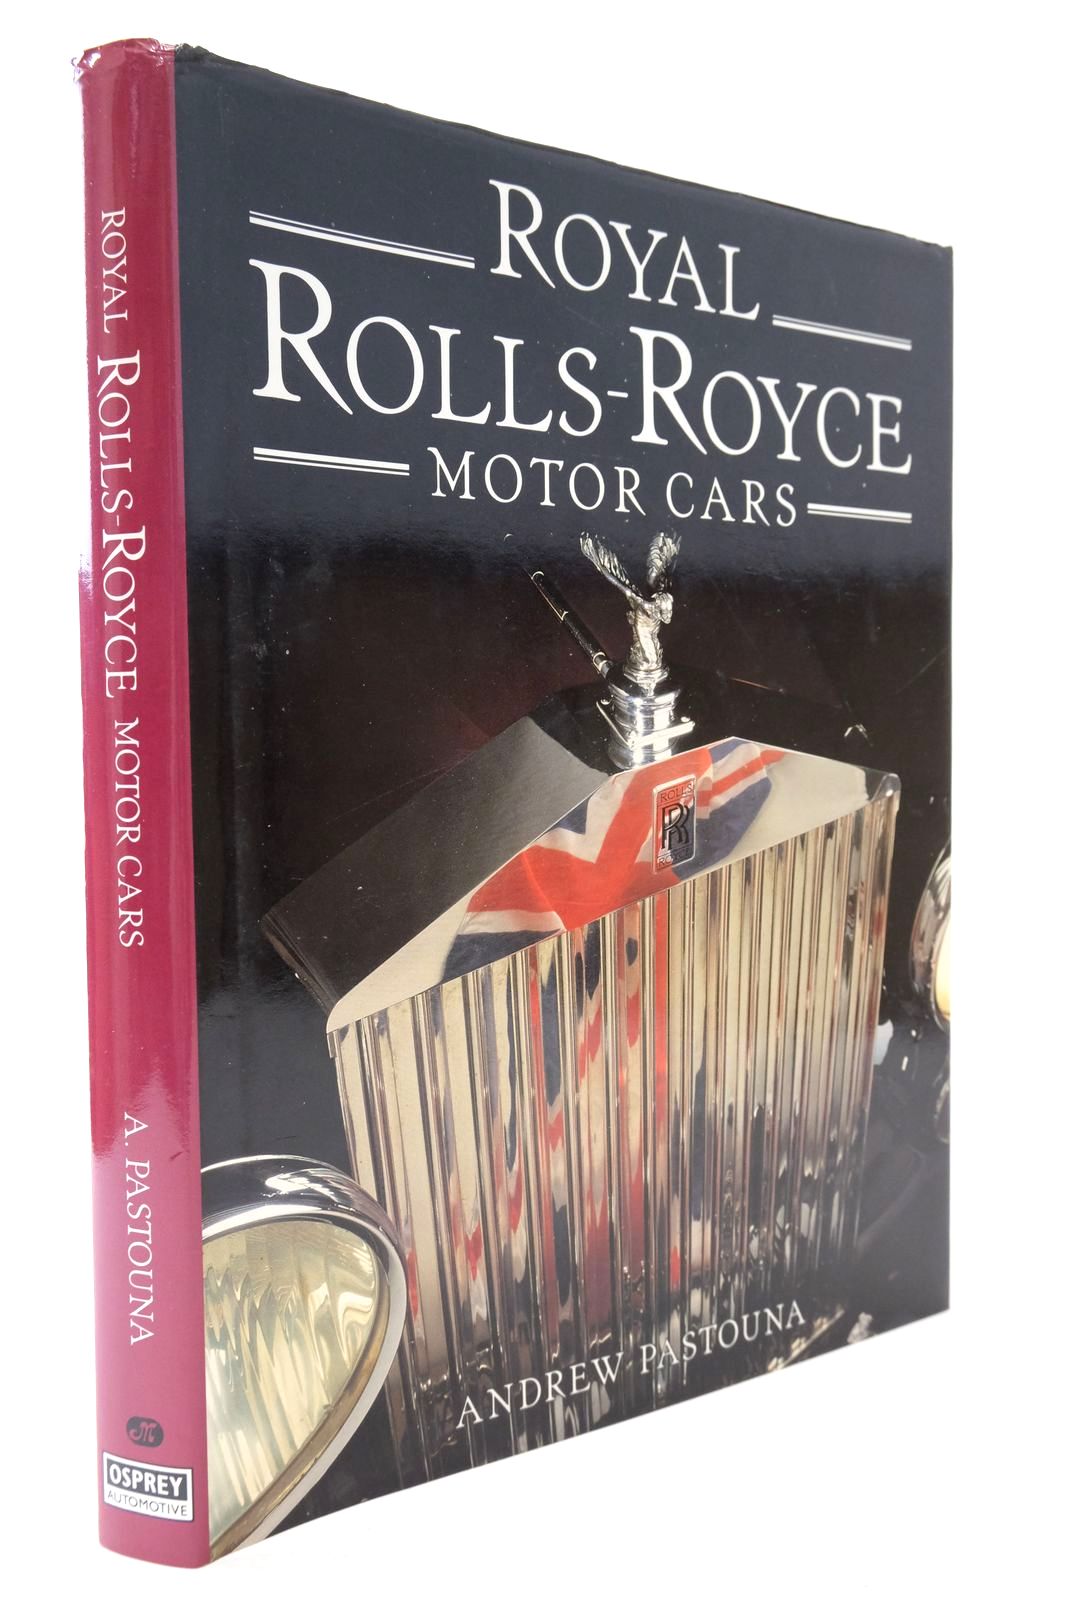 Photo of ROYAL ROLLS-ROYCE MOTOR CARS- Stock Number: 2132848